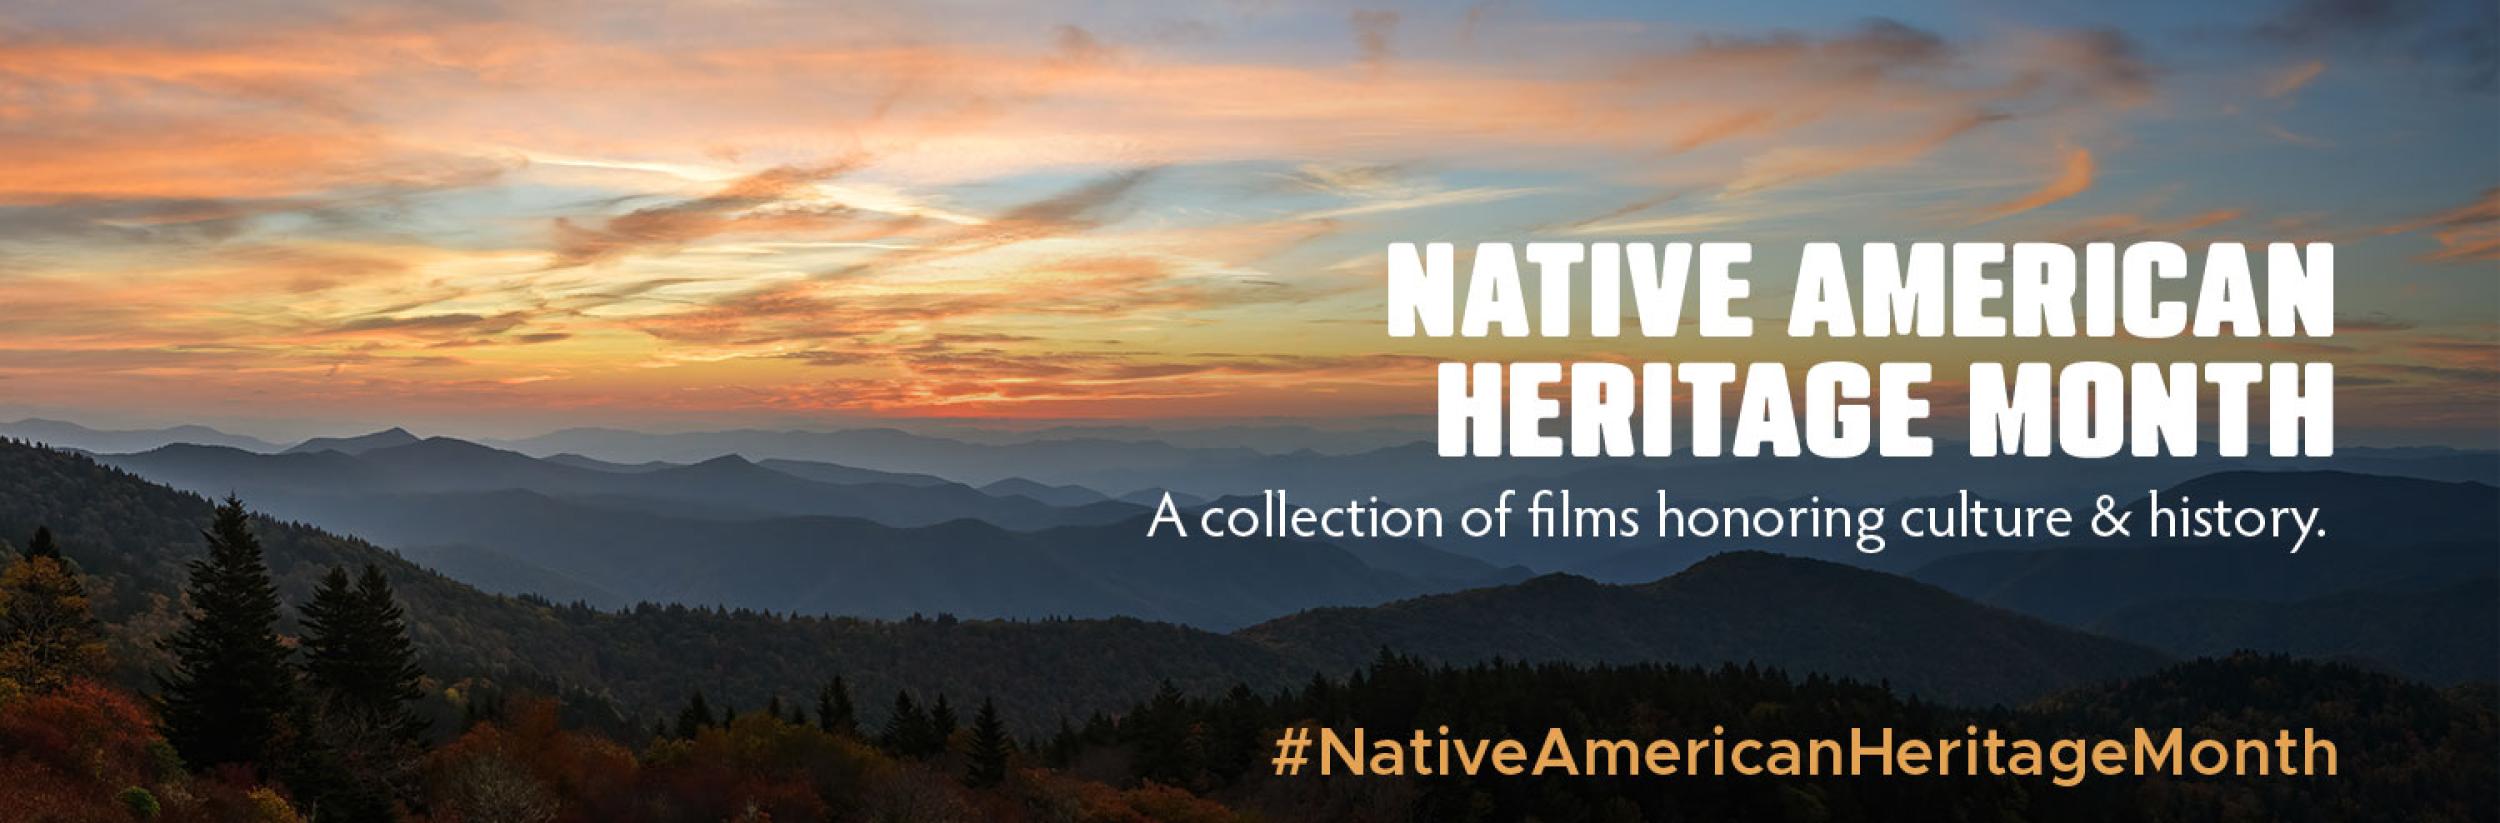 Image for "Native American Heritage Month"